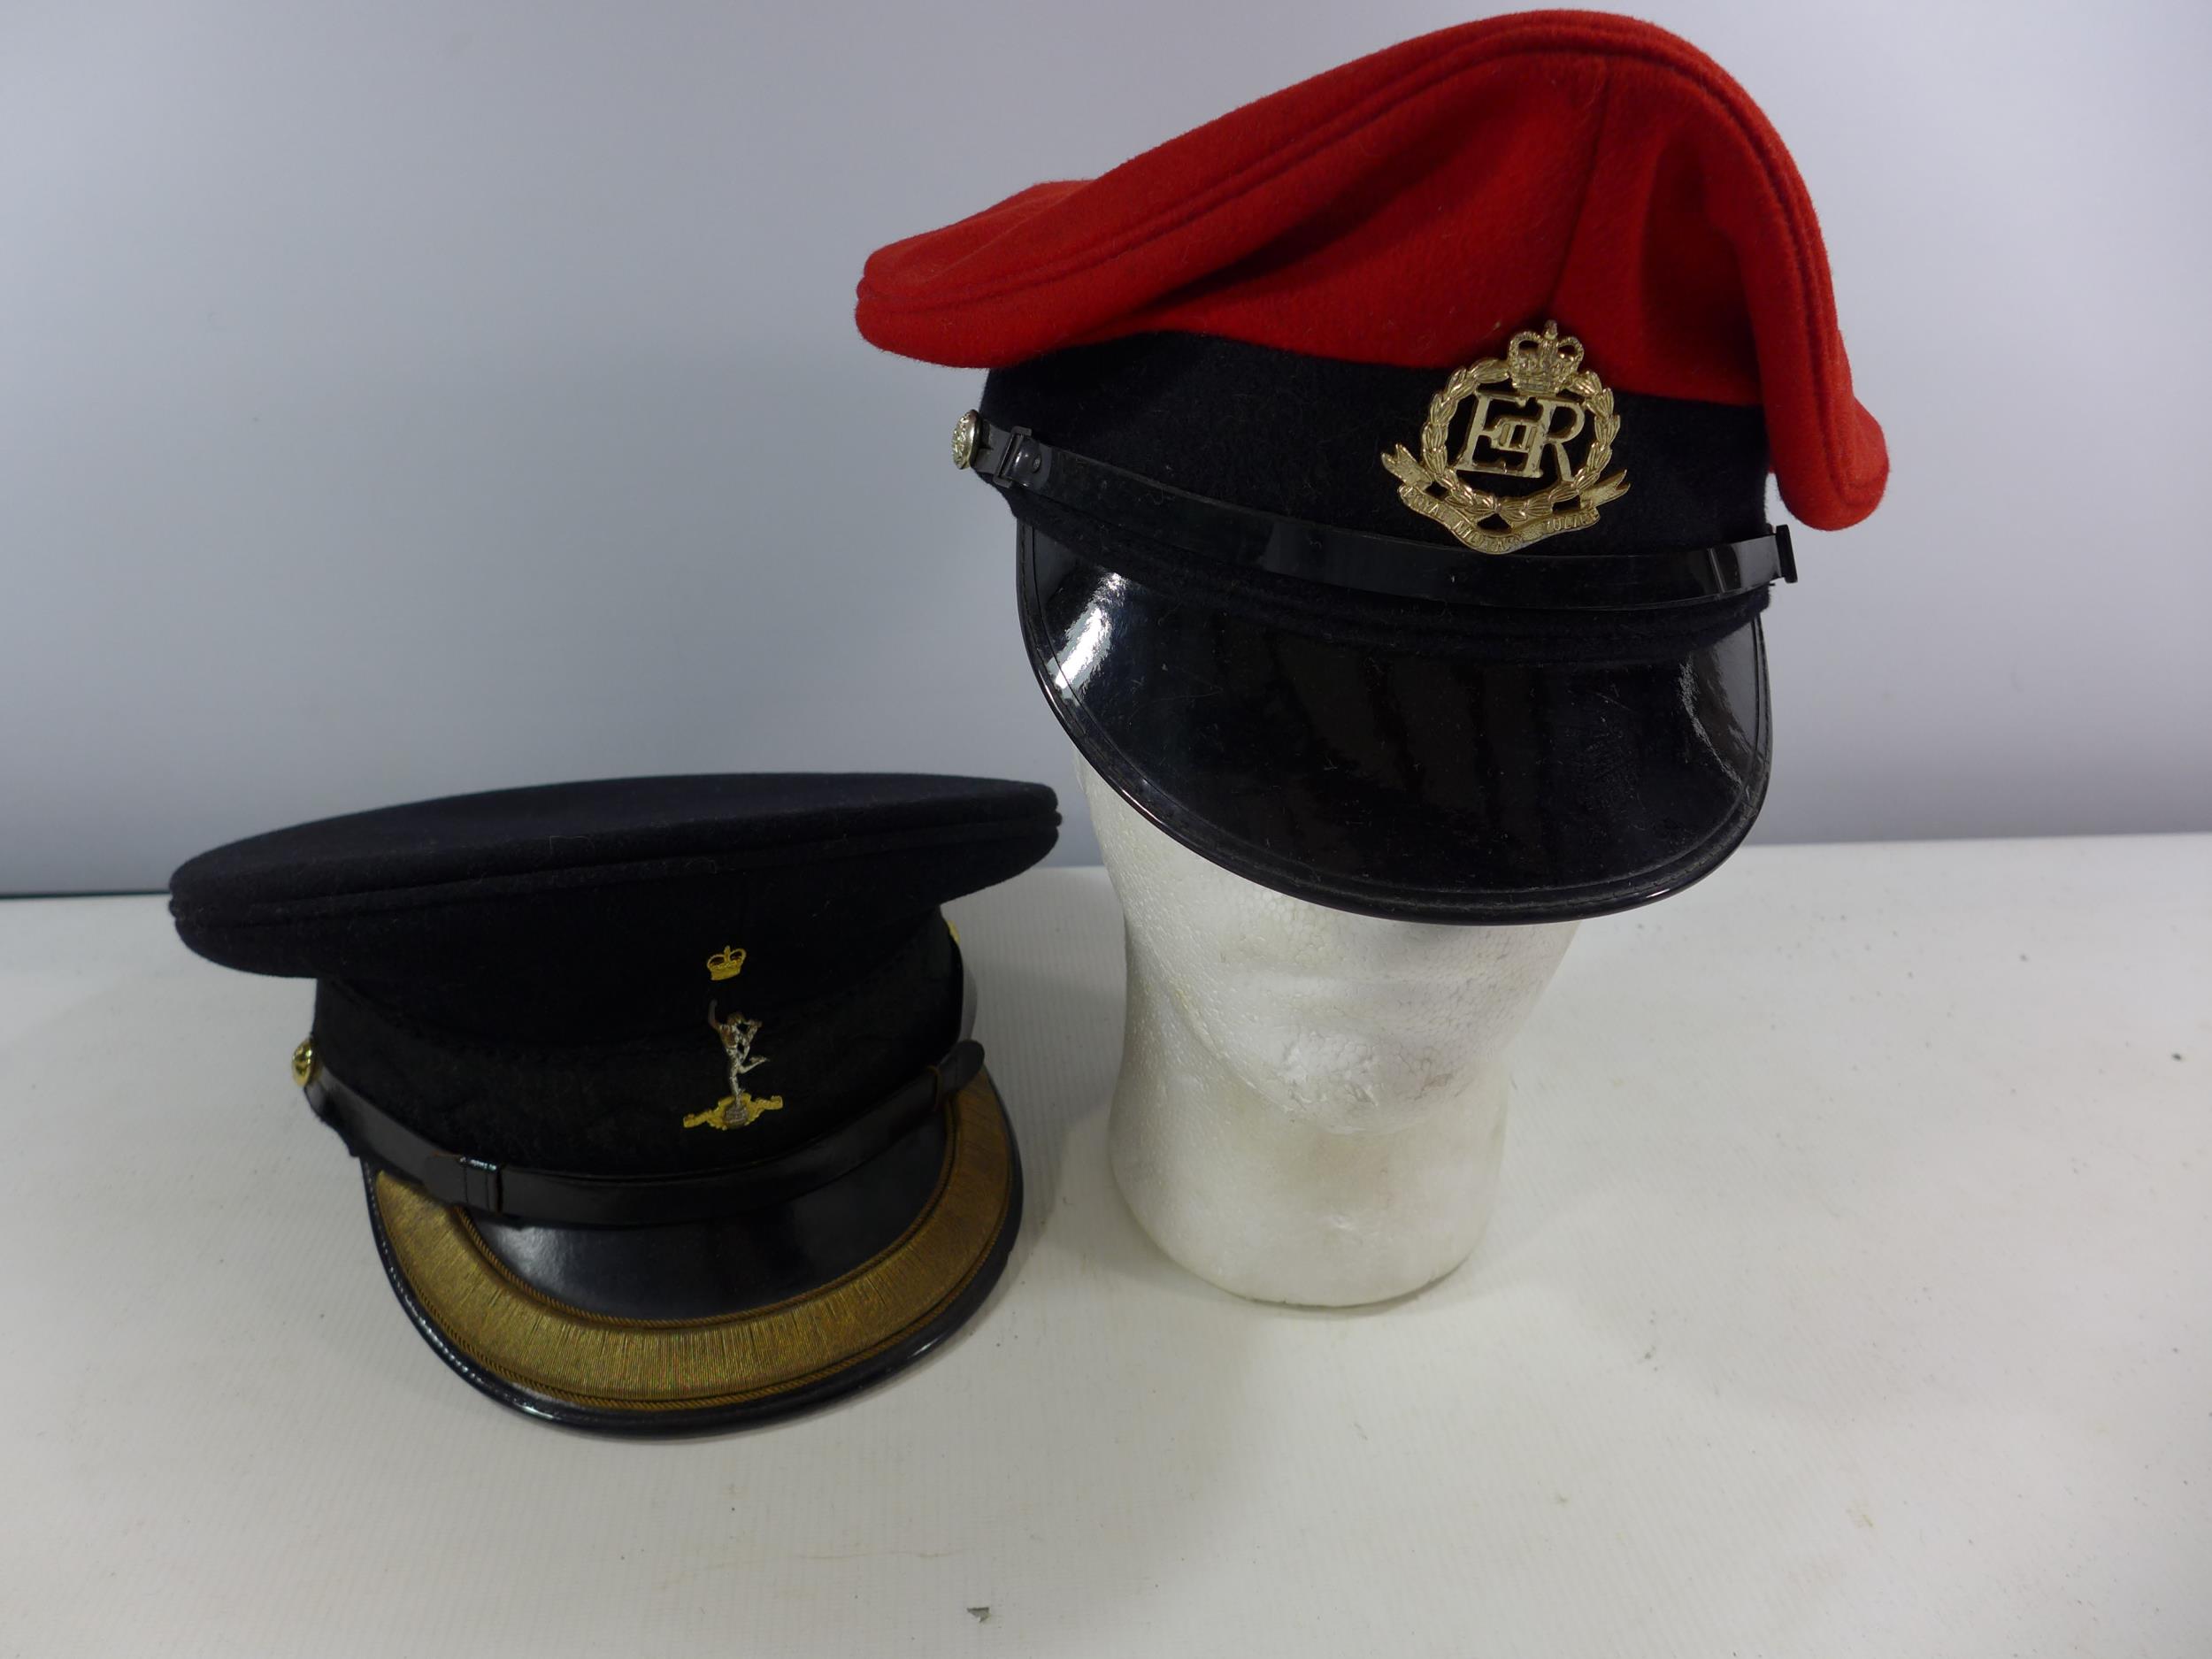 A BRITISH ROYAL MILITARY POLICE PEAKED CAP AND A ROYAL CORP OF SIGNALS PEAKED CAP, SIZE 7 1/4